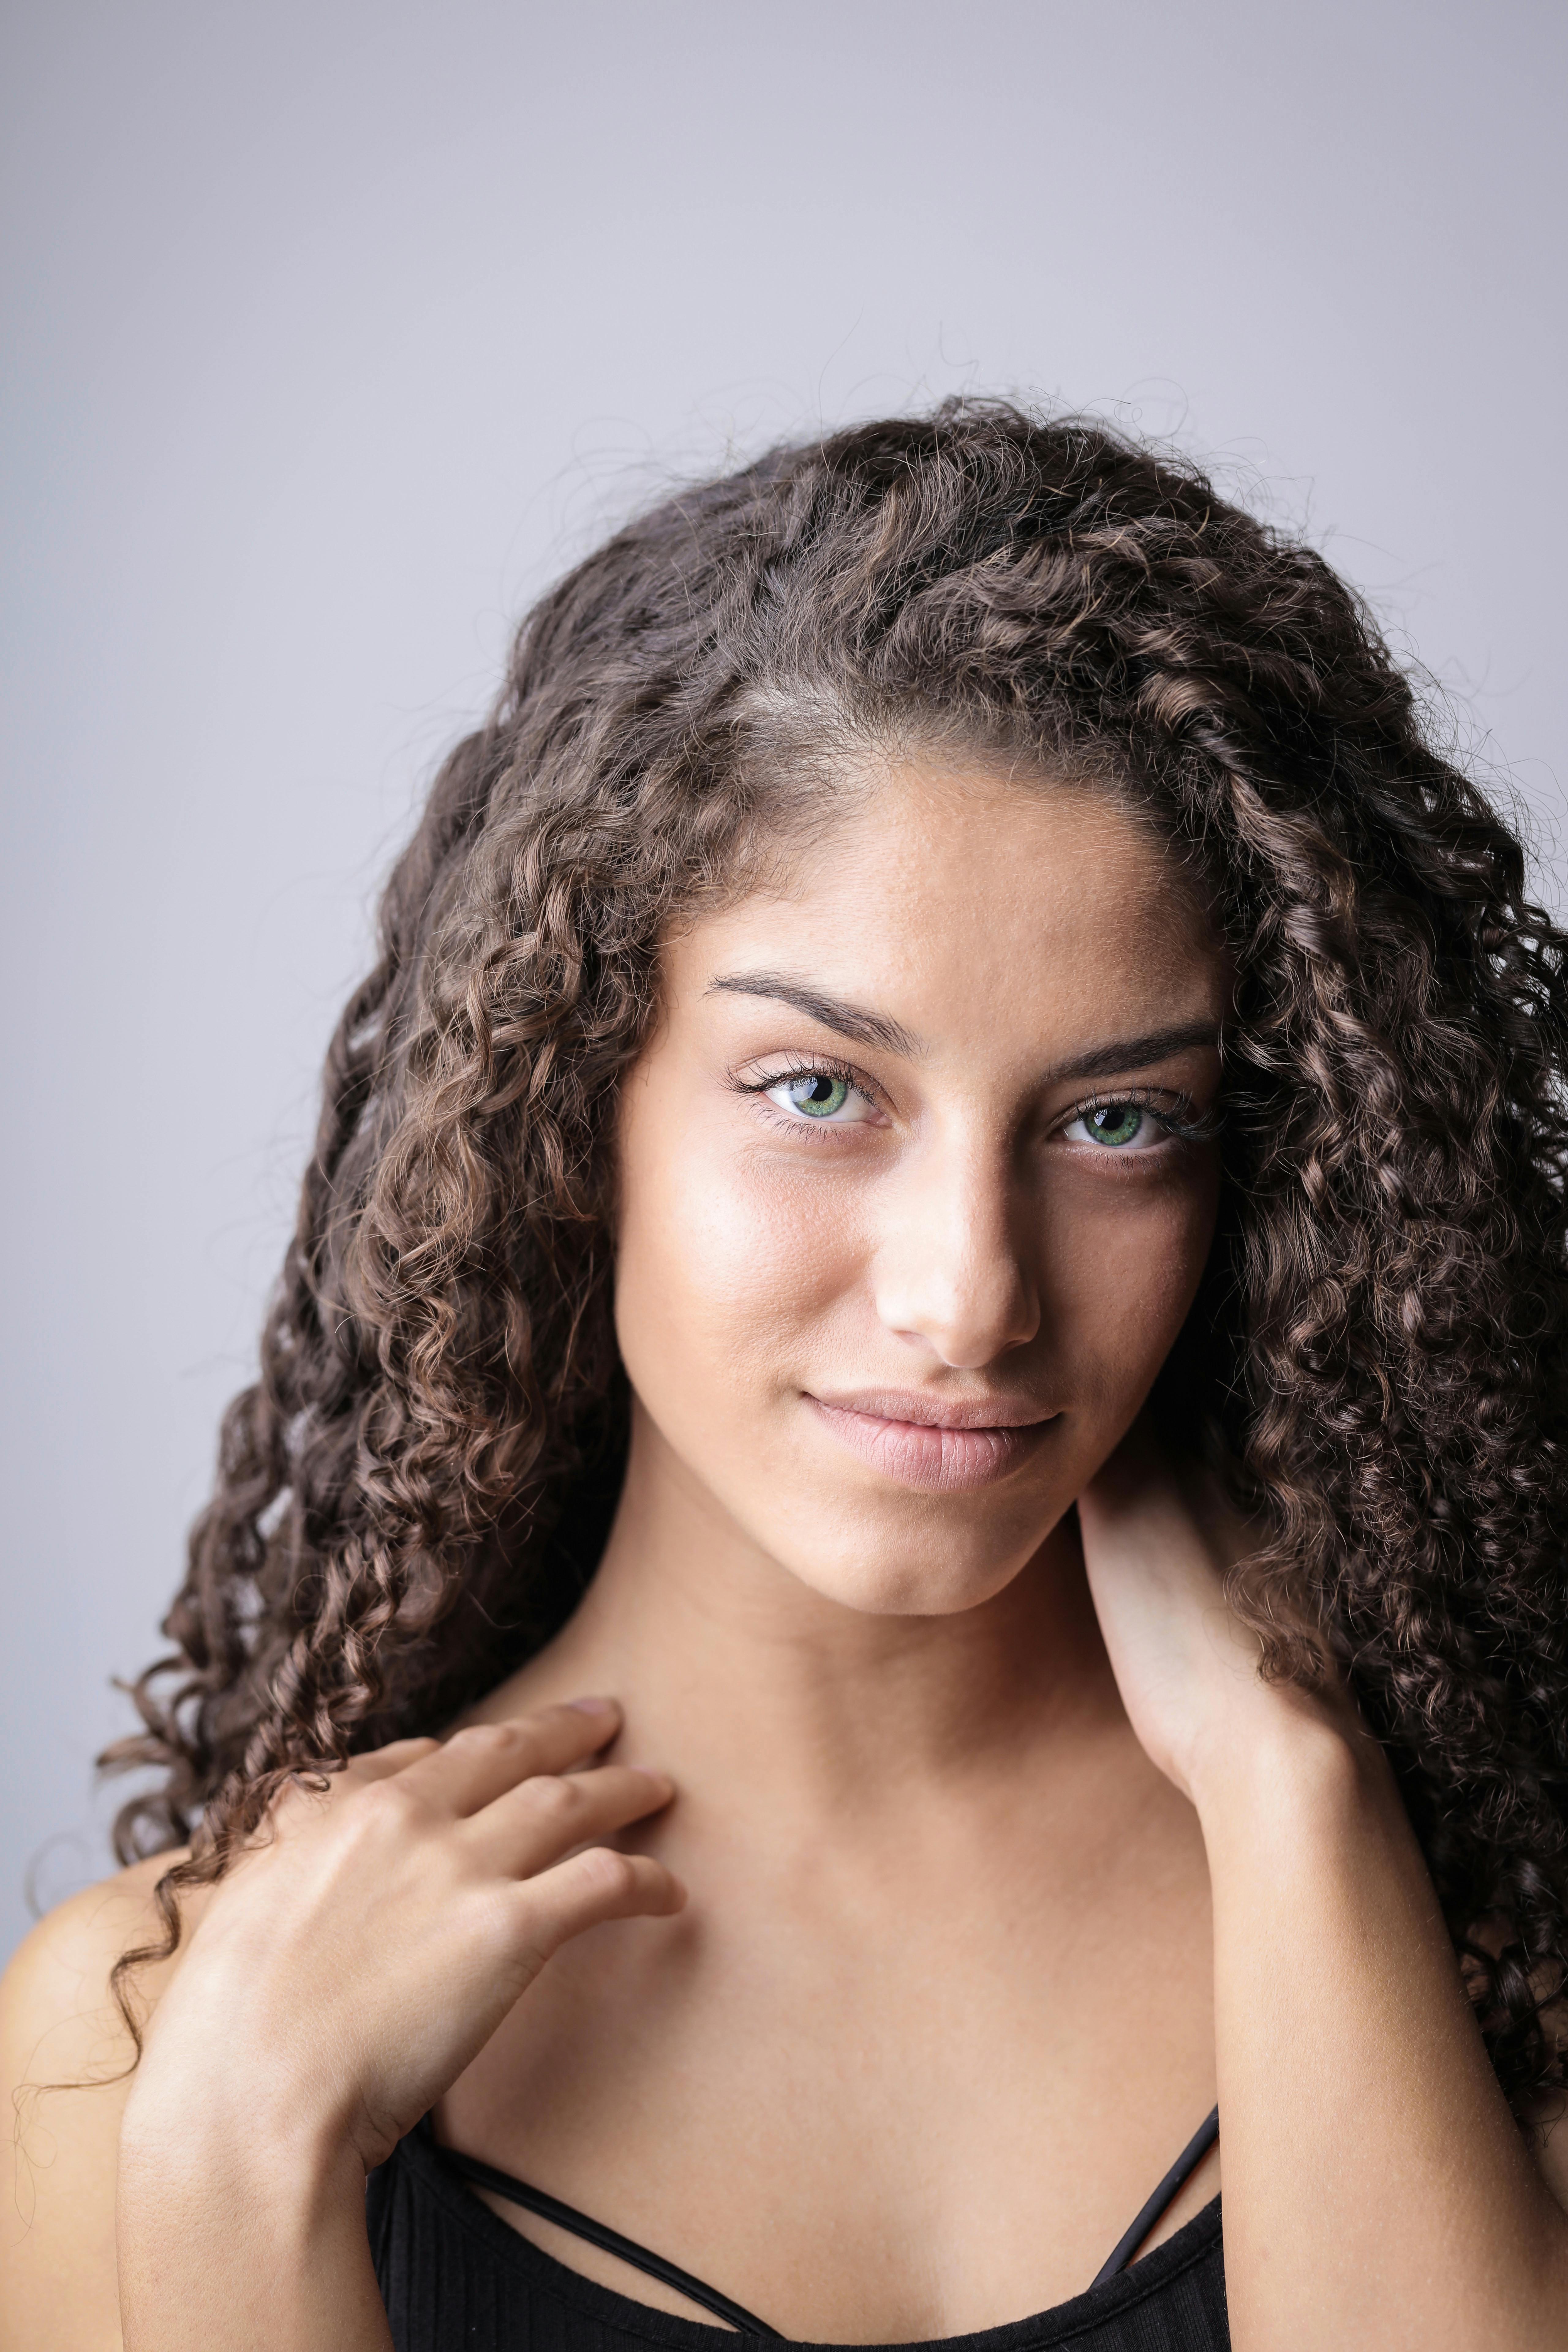 Portrait Photo of Woman With Brown Curly Hair · Free Stock ...